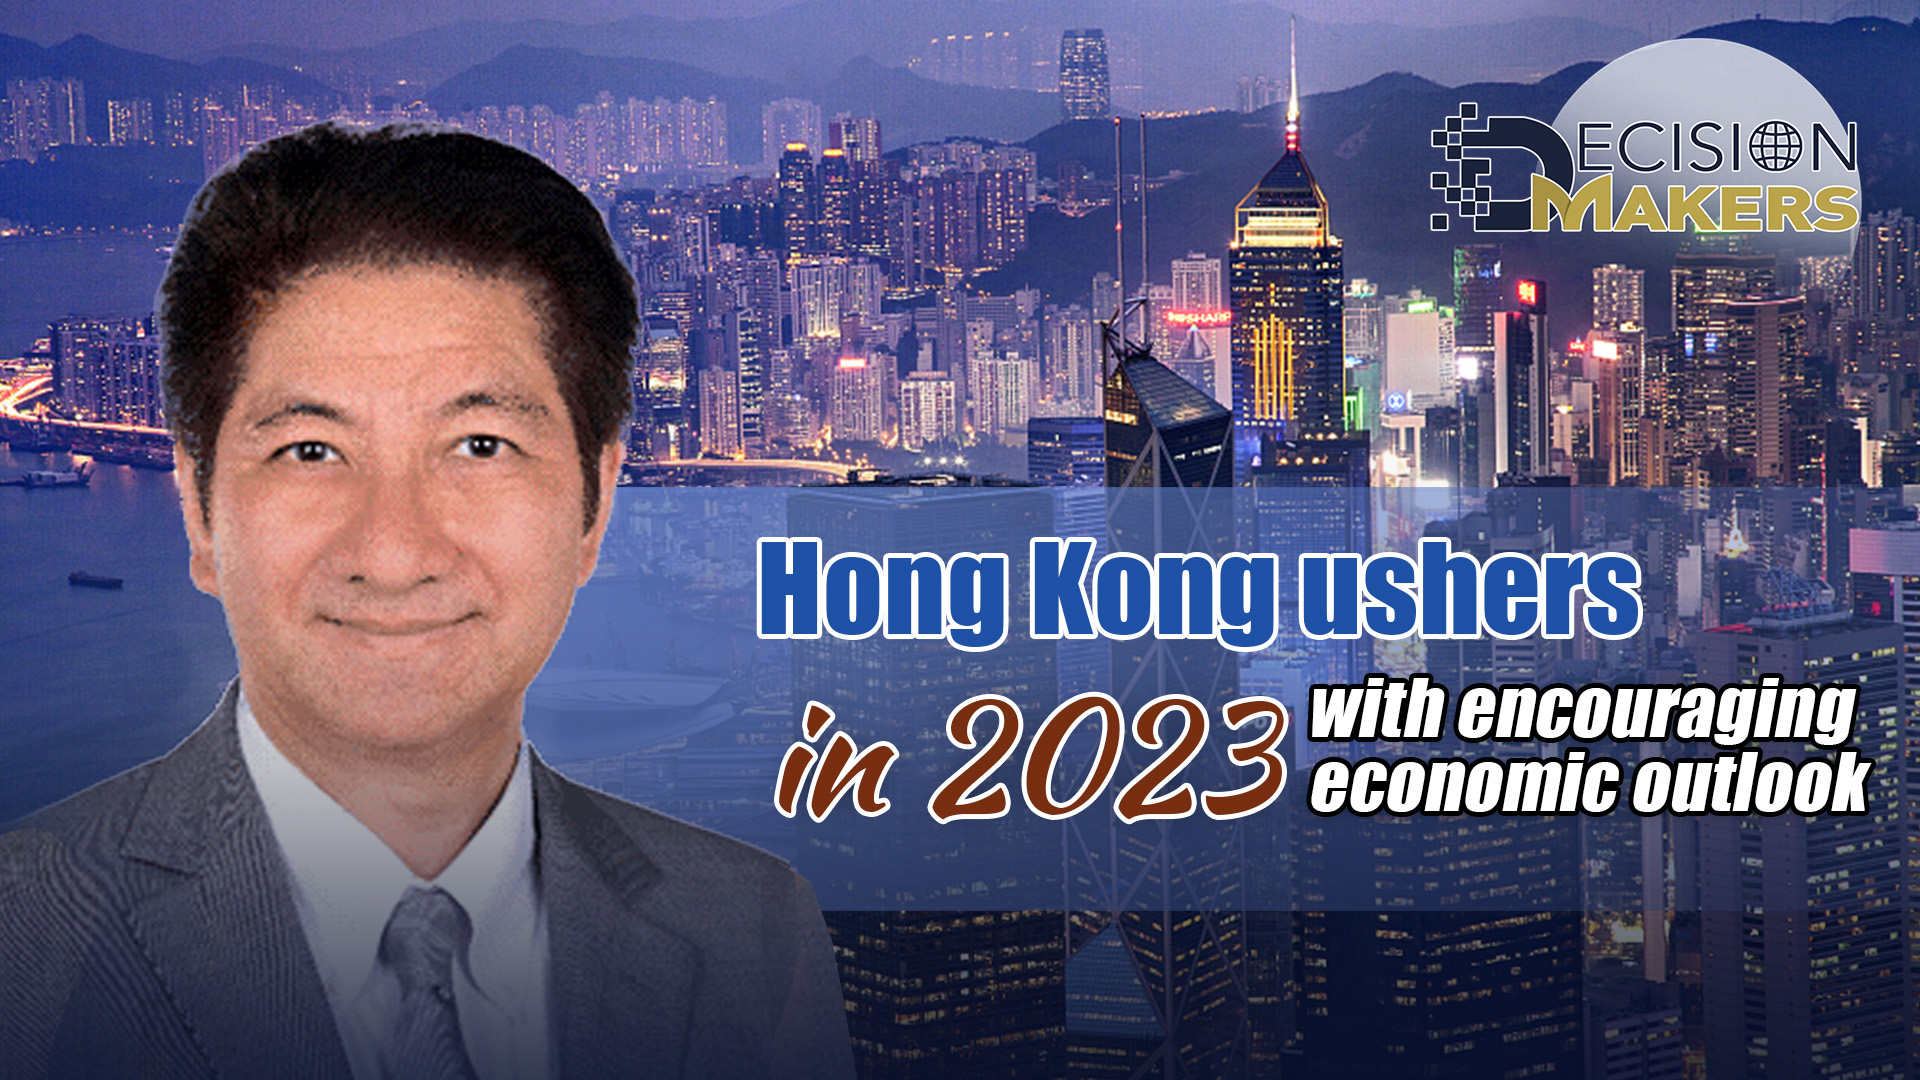 Hong Kong ushers in 2023 with encouraging economic outlook